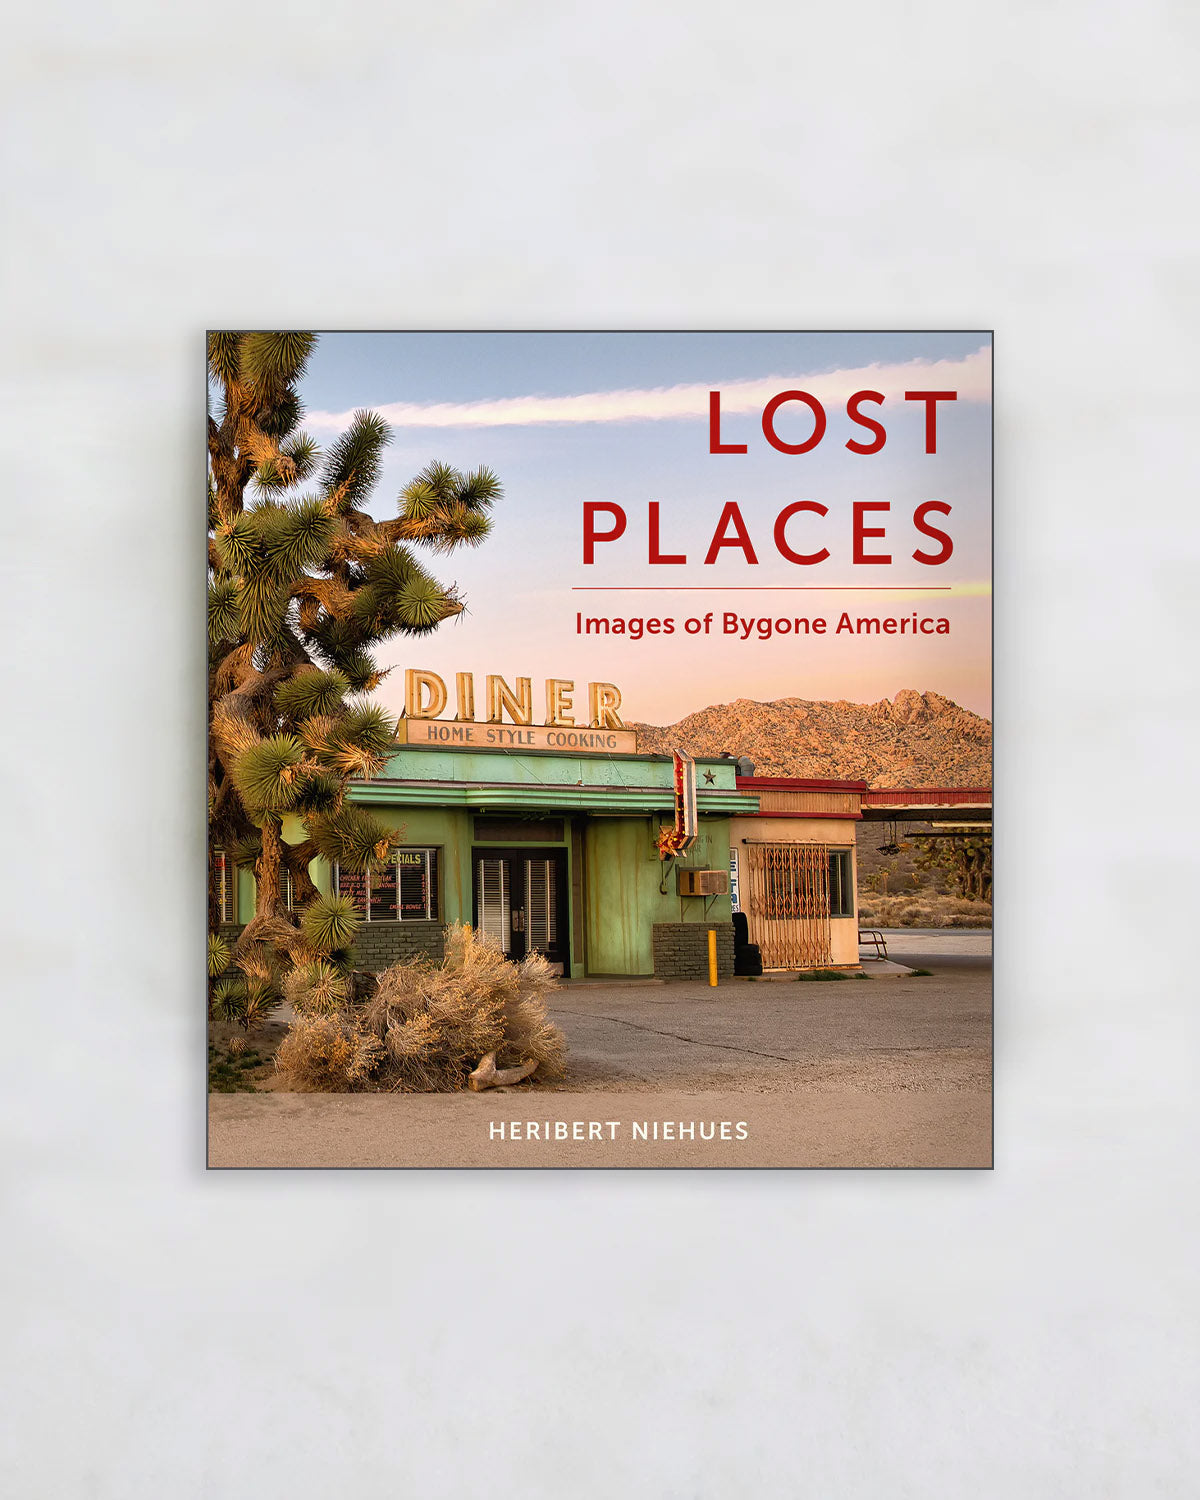 Lost Places: Images of Bygone America by Heribert Niehues